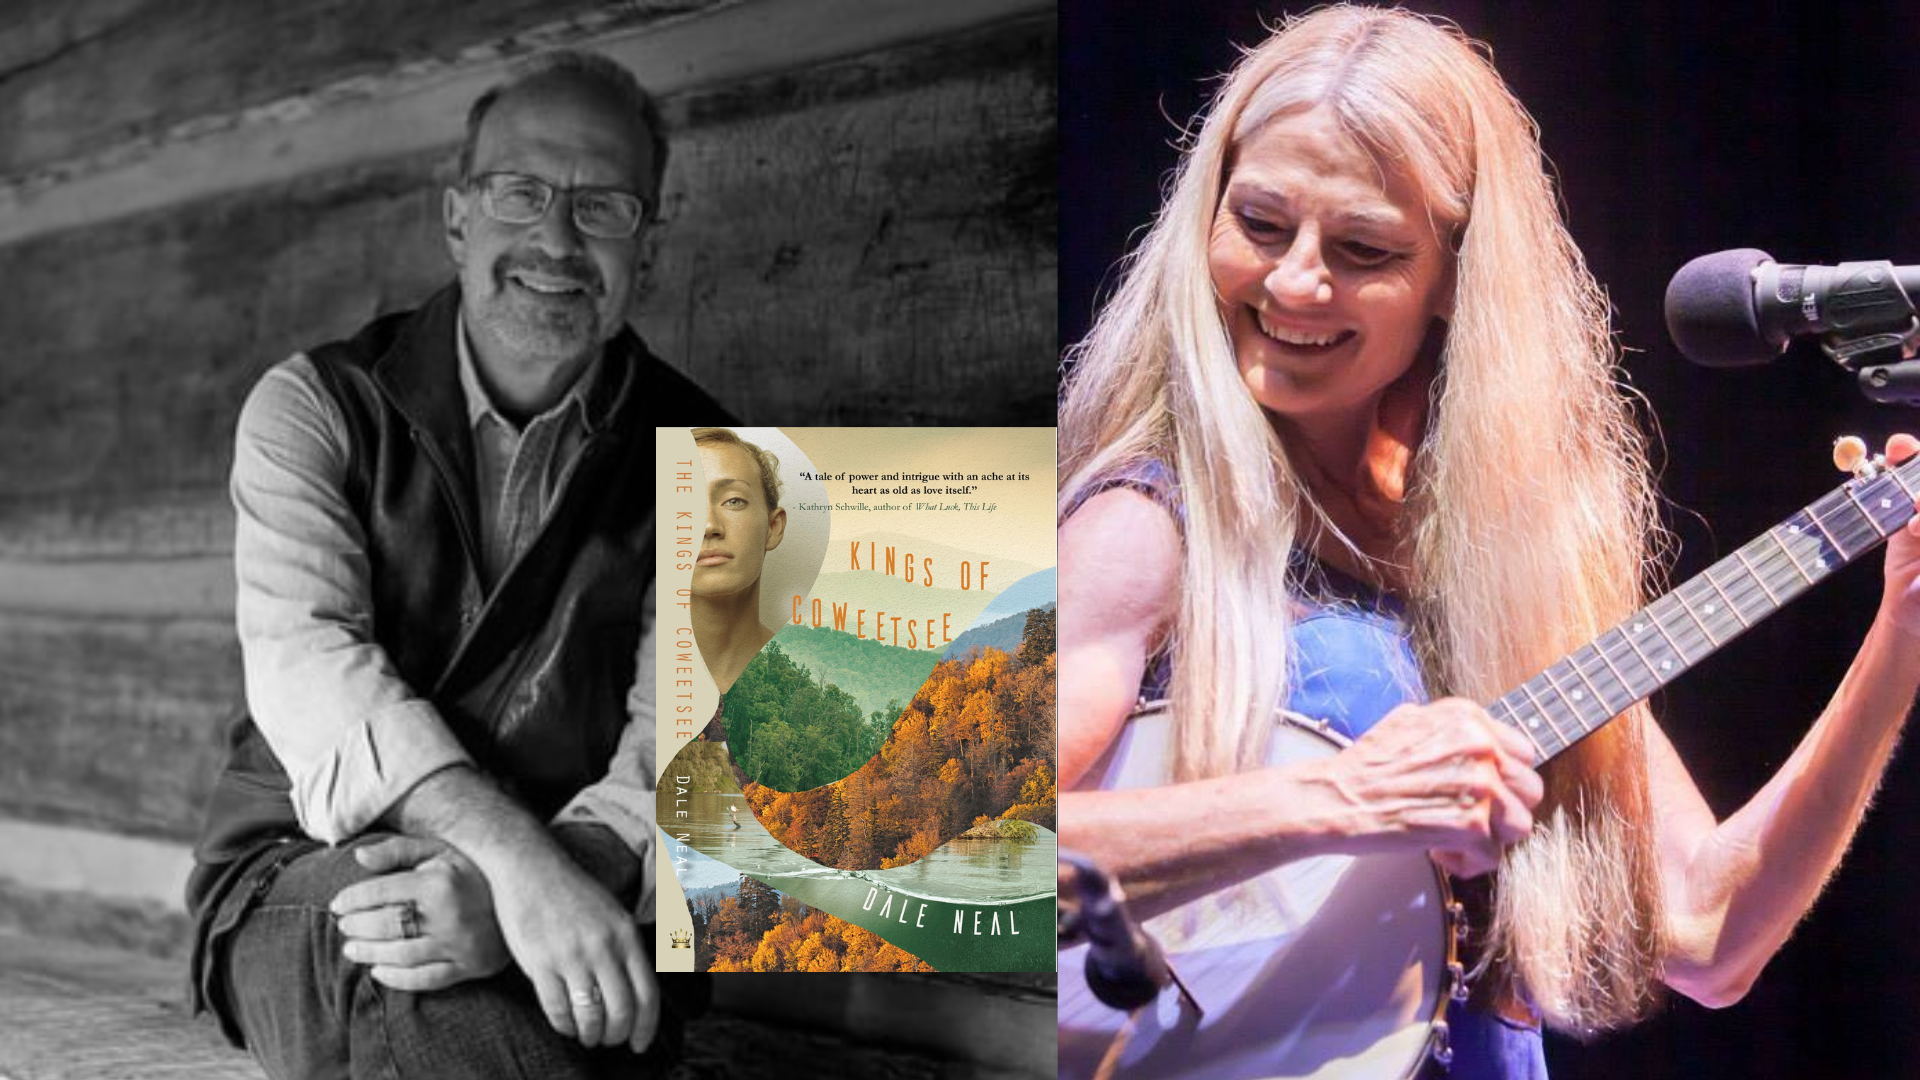 Author Dale Neal, left, next to an image of his forthcoming book cover, and musician Sheila Kay Adams holding a banjo/